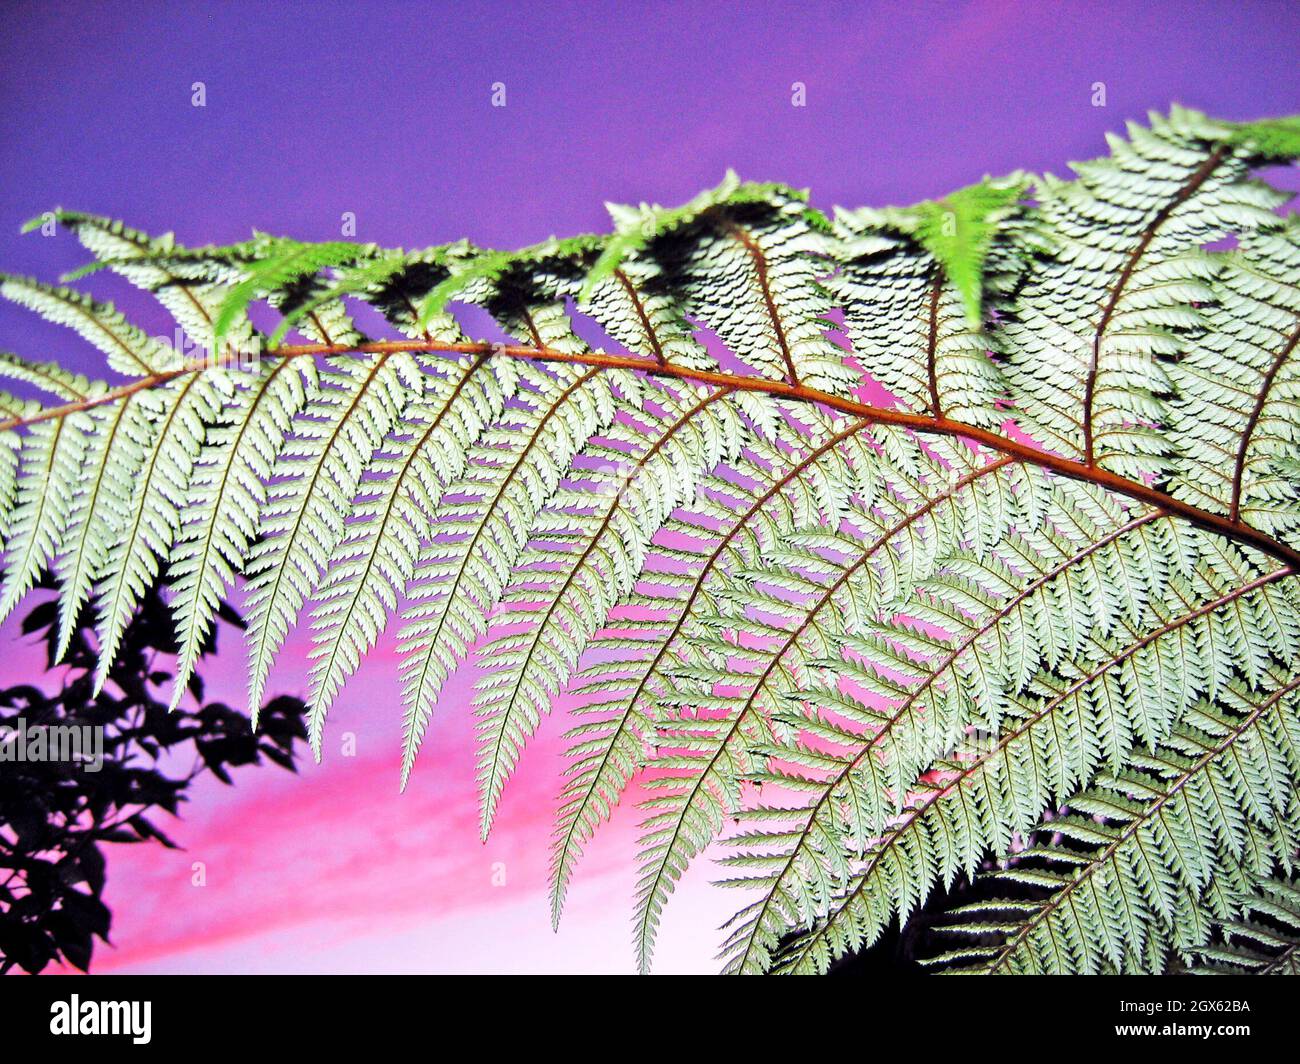 The iconic silver fern, an iconic indigenous tree fern in New Zealand, contrasts with the purple sky sunset.  The most abundant fern in New Zealand, the fern has been functional throughout the cultural history of New Zealand.  One side is green, the other silver, and has been used as a trail marker throughout the history as the silver side of the fern reflects the night sky. Stock Photo